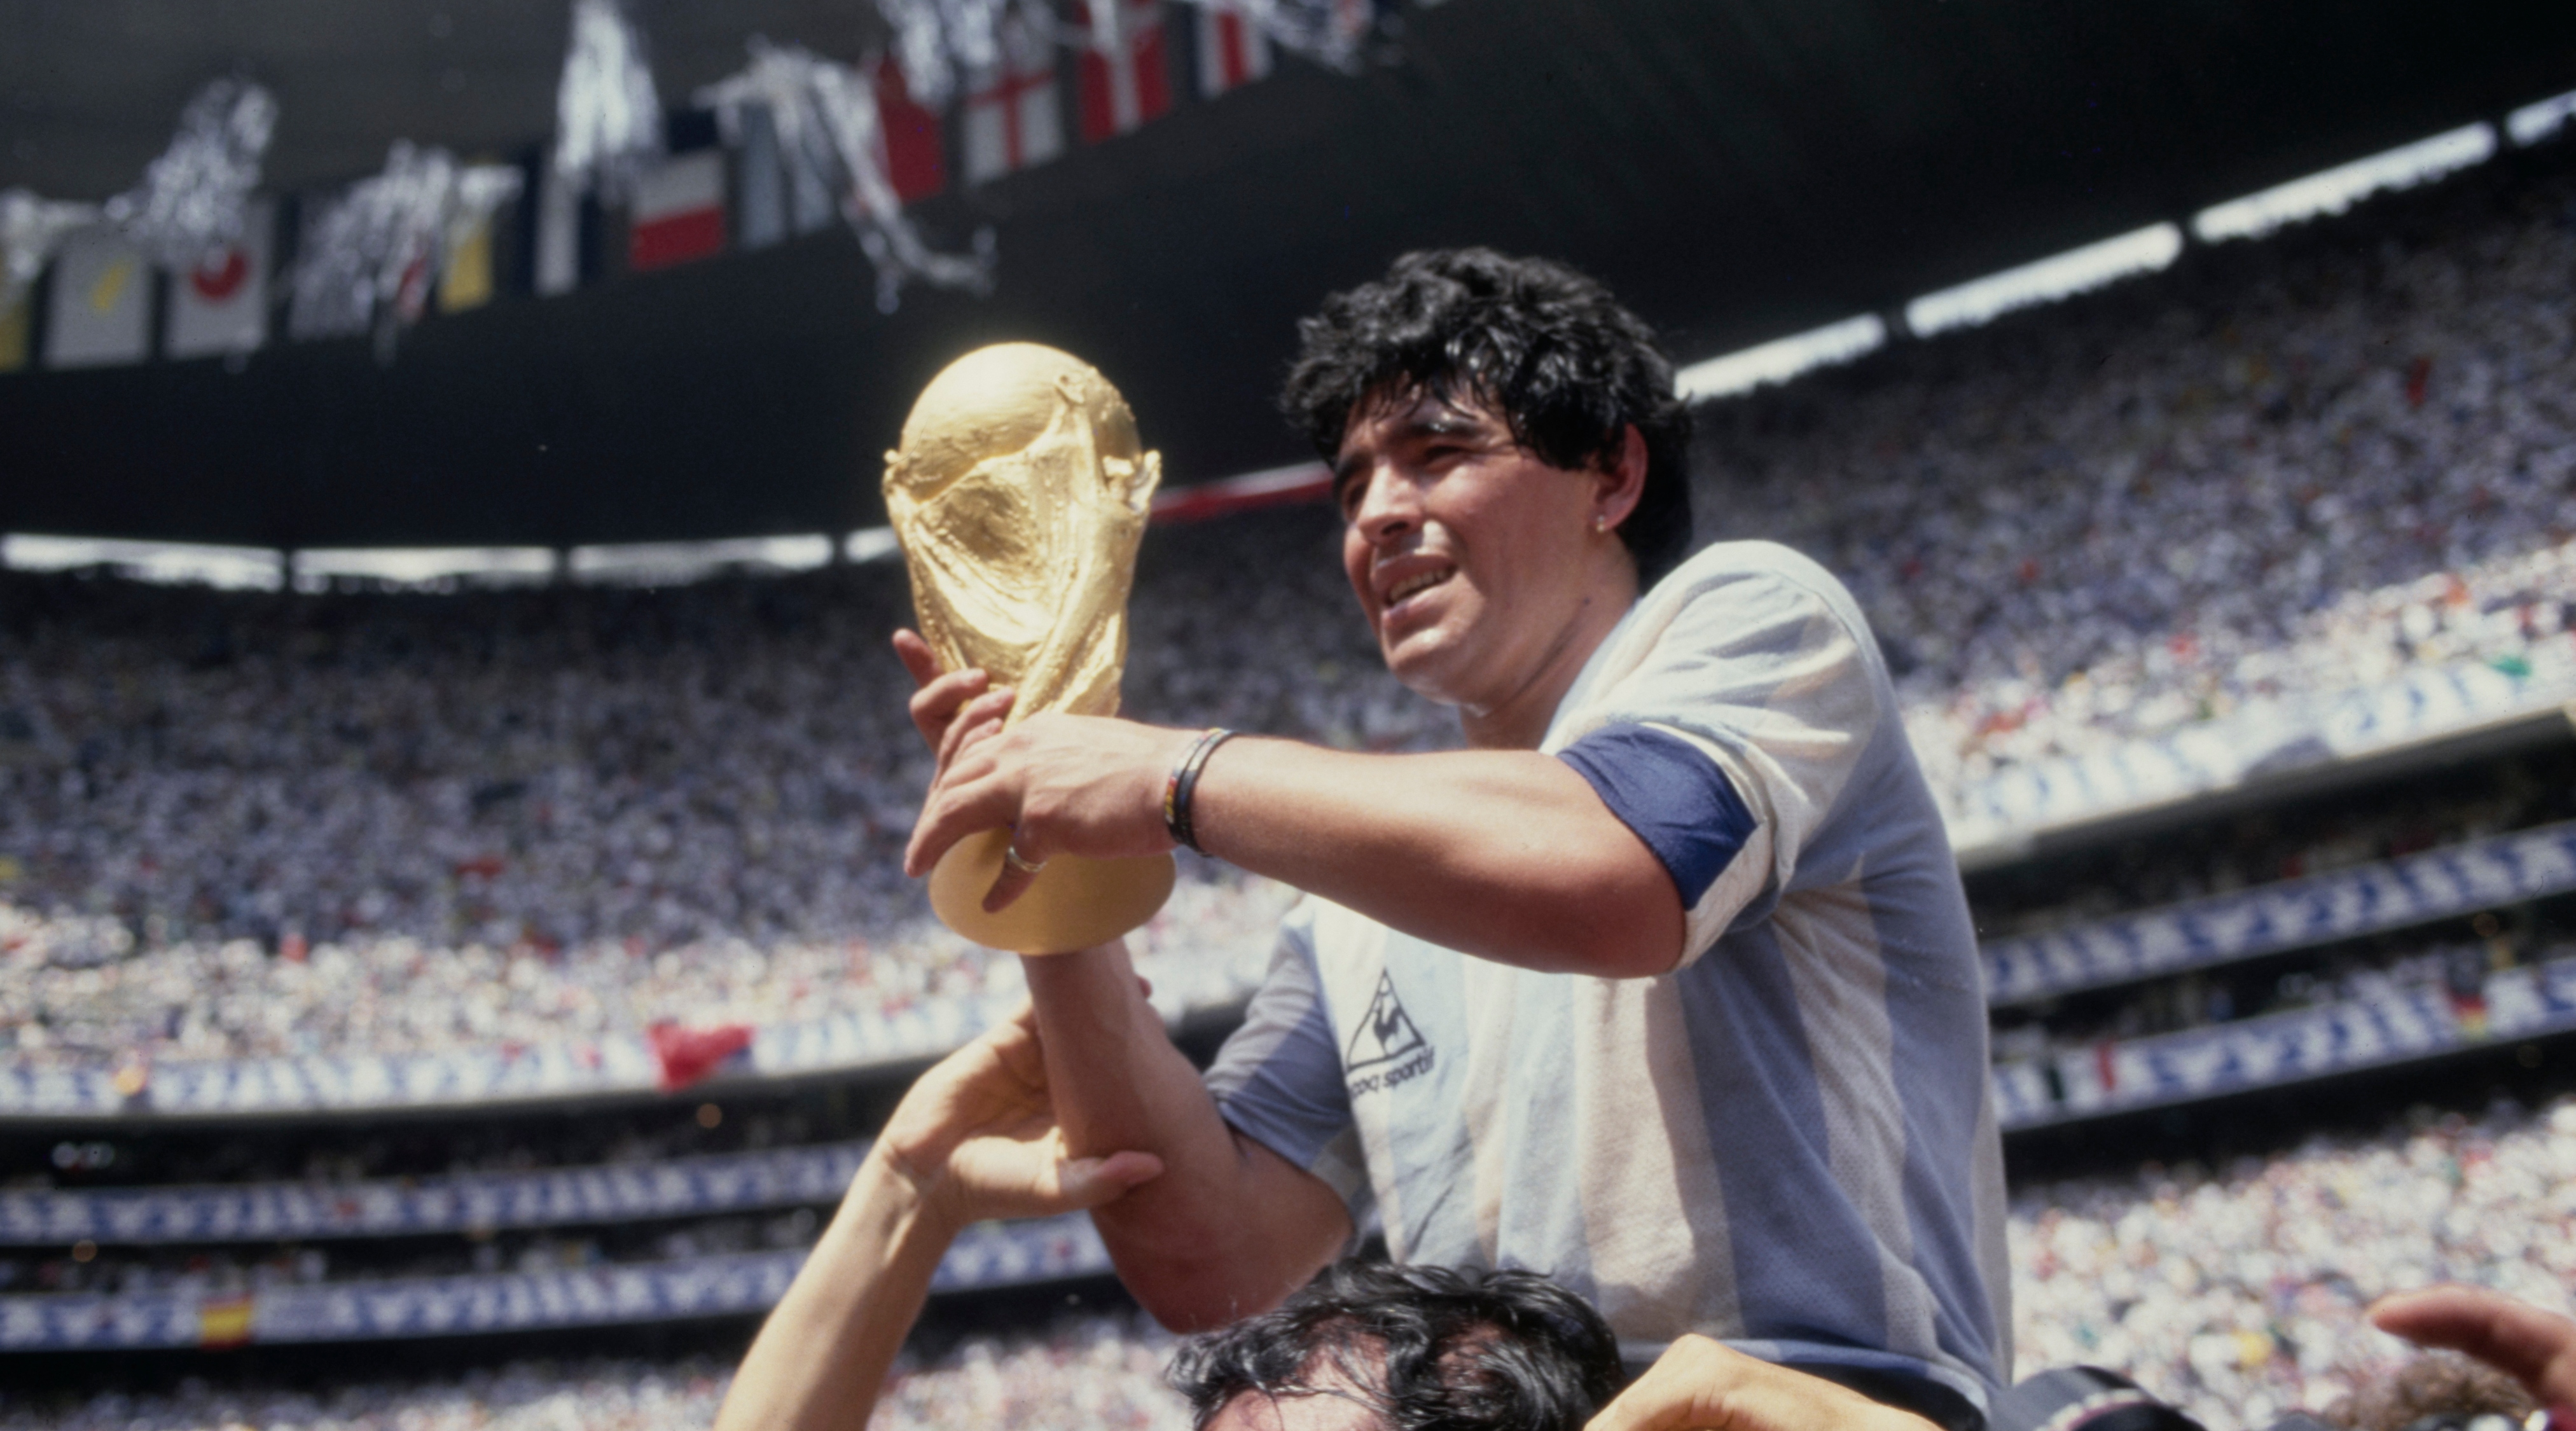 Diego Maradona holds the World Cup trophy after Argentina defeated West Germany 3-2 in the 1986 World Cup final at the Azteca Stadium, Mexico City on June 29, 1986.